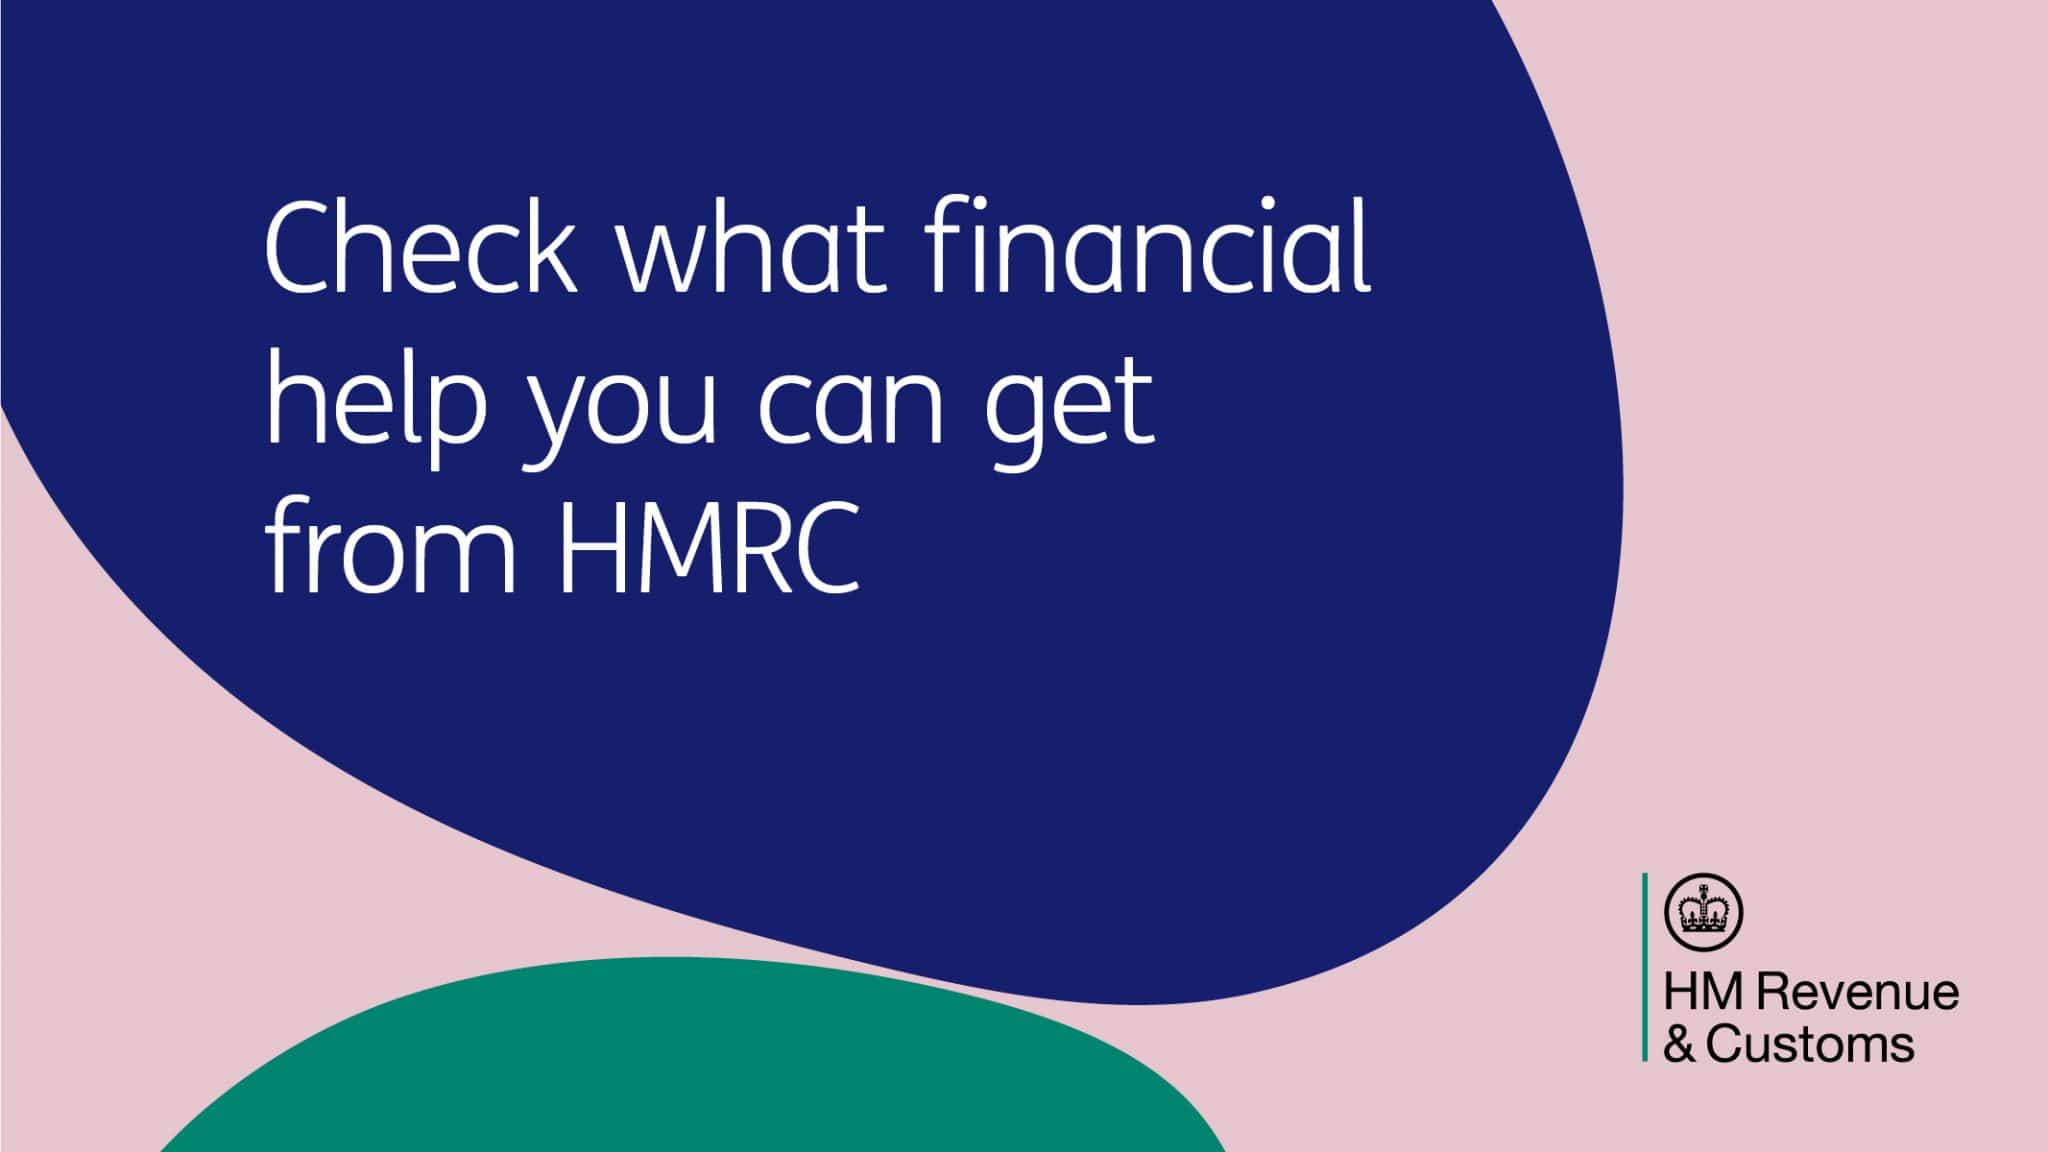 Check what financial help you can get from HMRC